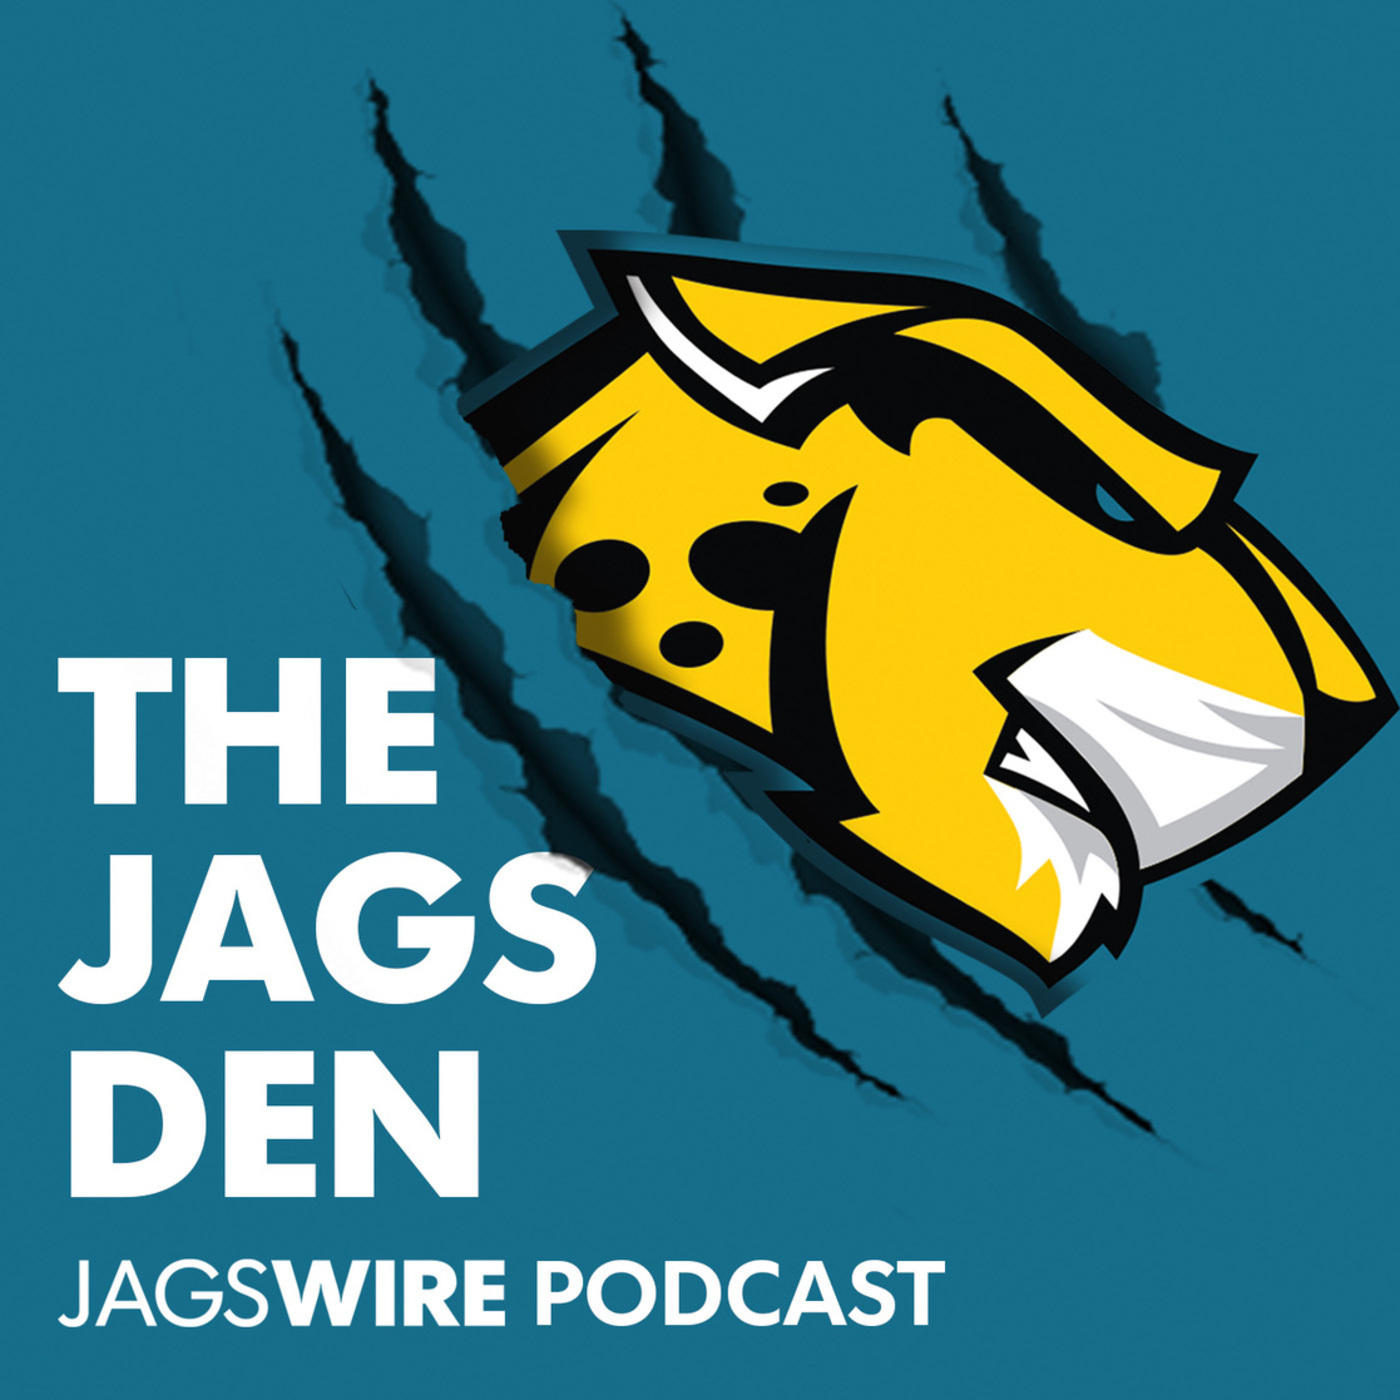 Quick hit on Jags' stadium situation and Lamping's recent comments